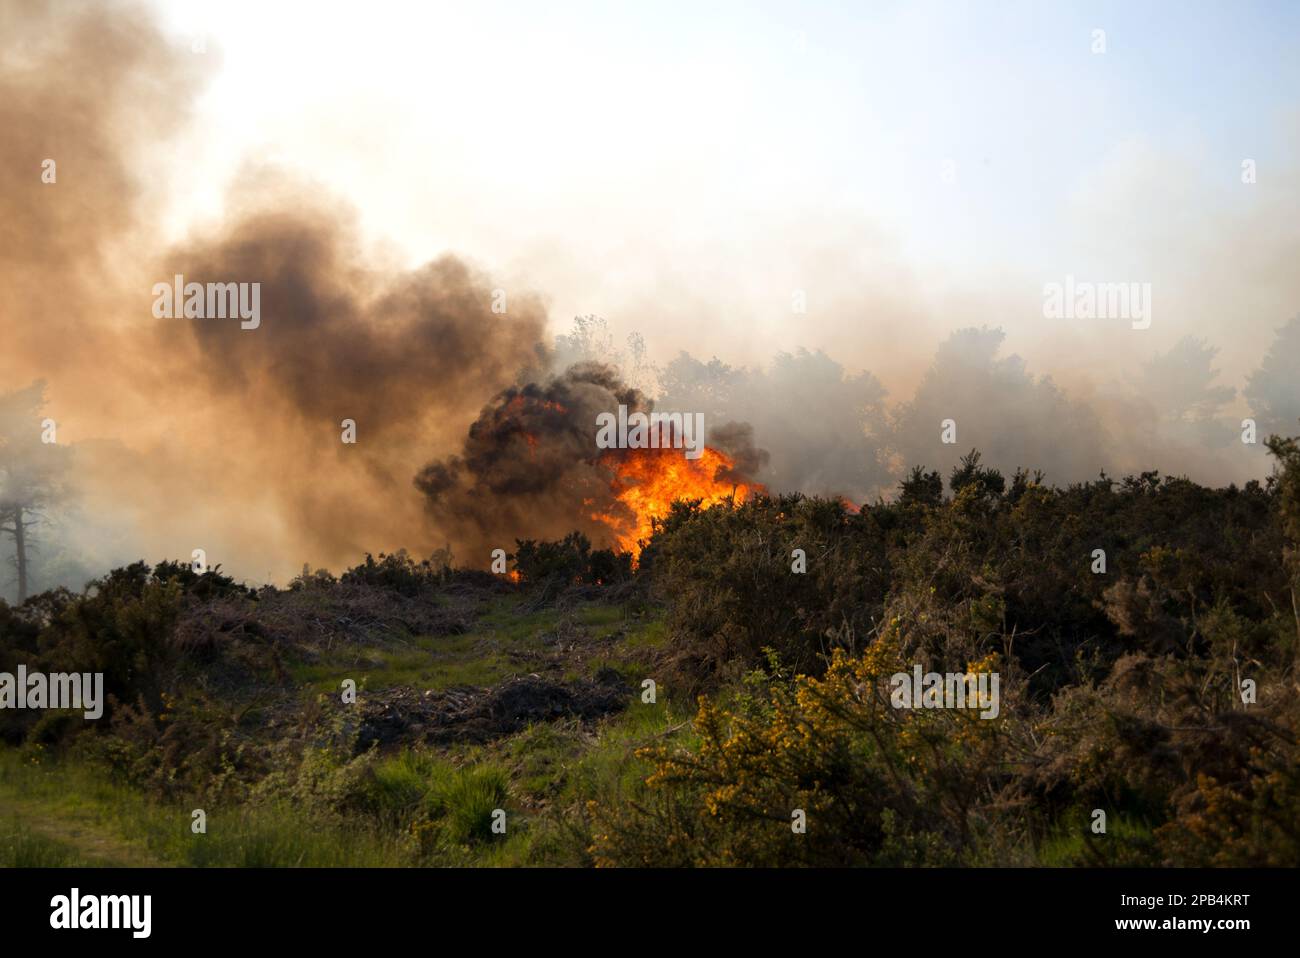 Fire on heathland, caused either by carelessness or arson, Ashdown Forest, East Sussex, England, United Kingdom, Europe Stock Photo